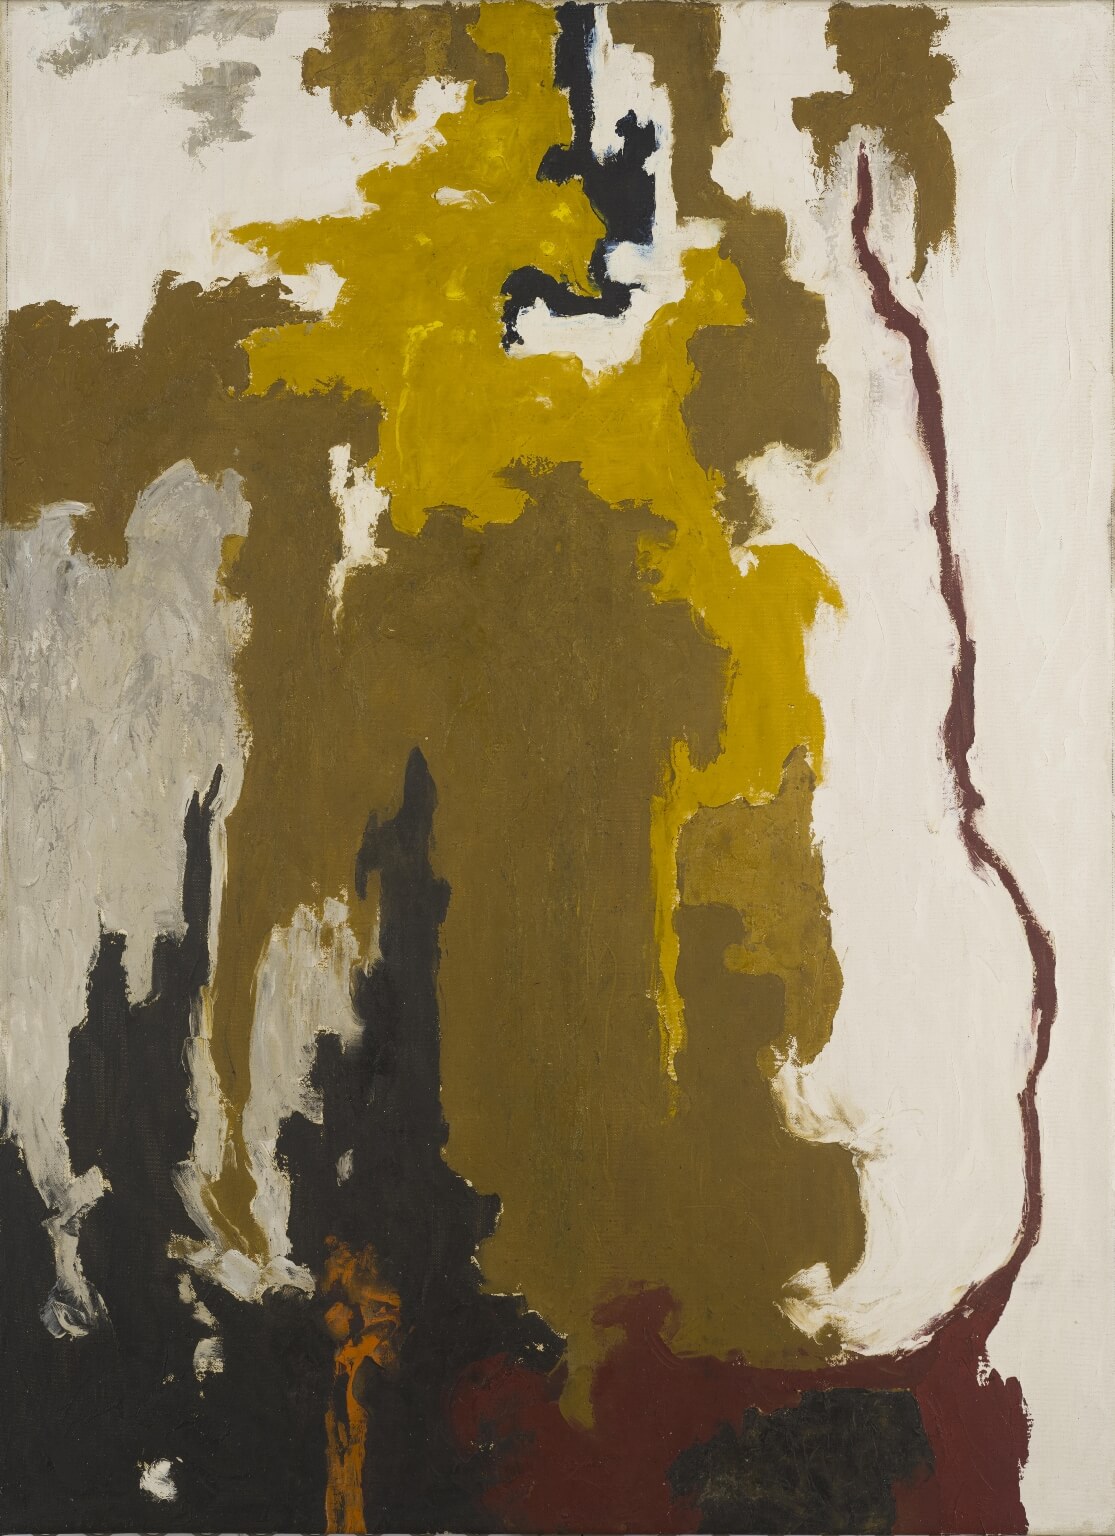 Vertical abstract painting with some bare canvas showing on the right side, and abstracted splotches of paint in brown, gold, gray, white, and black and a vertical red line moving upwards